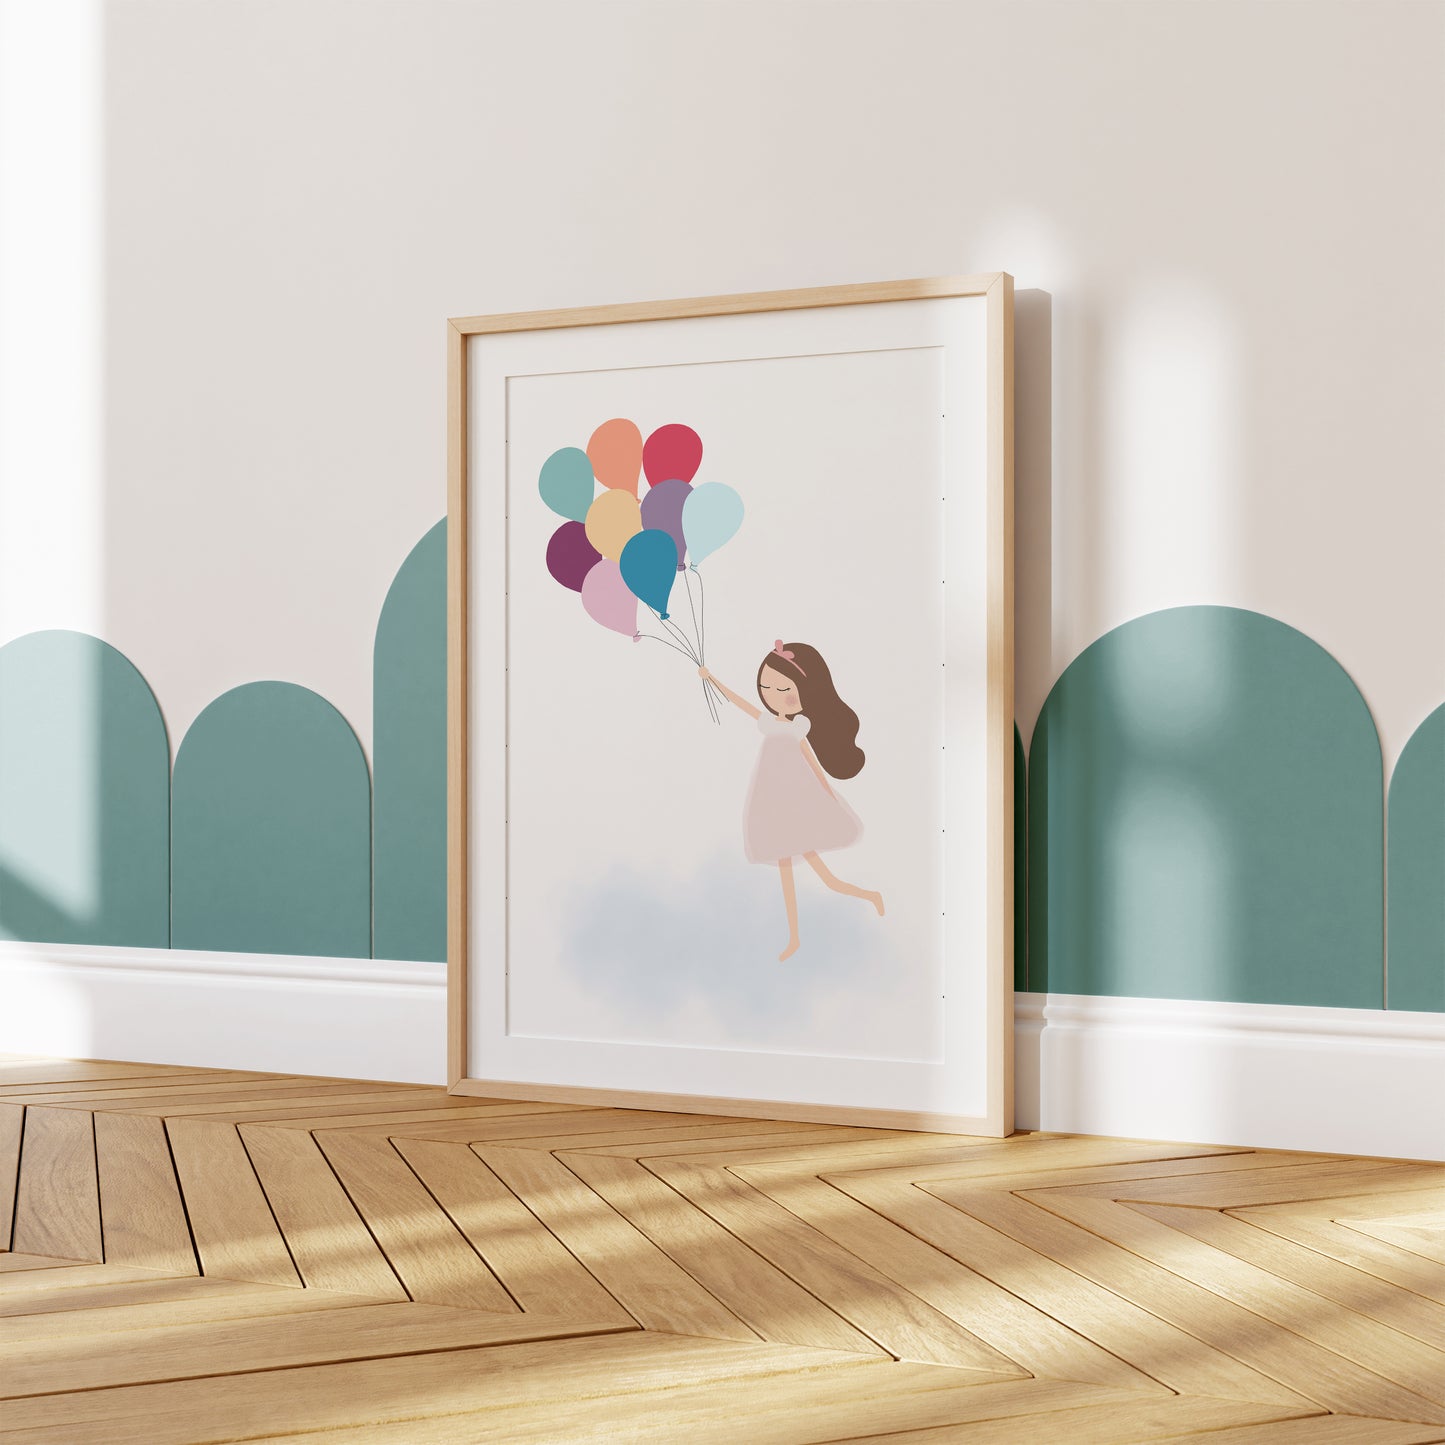 Flying with balloons poster by Jollie Bluebear